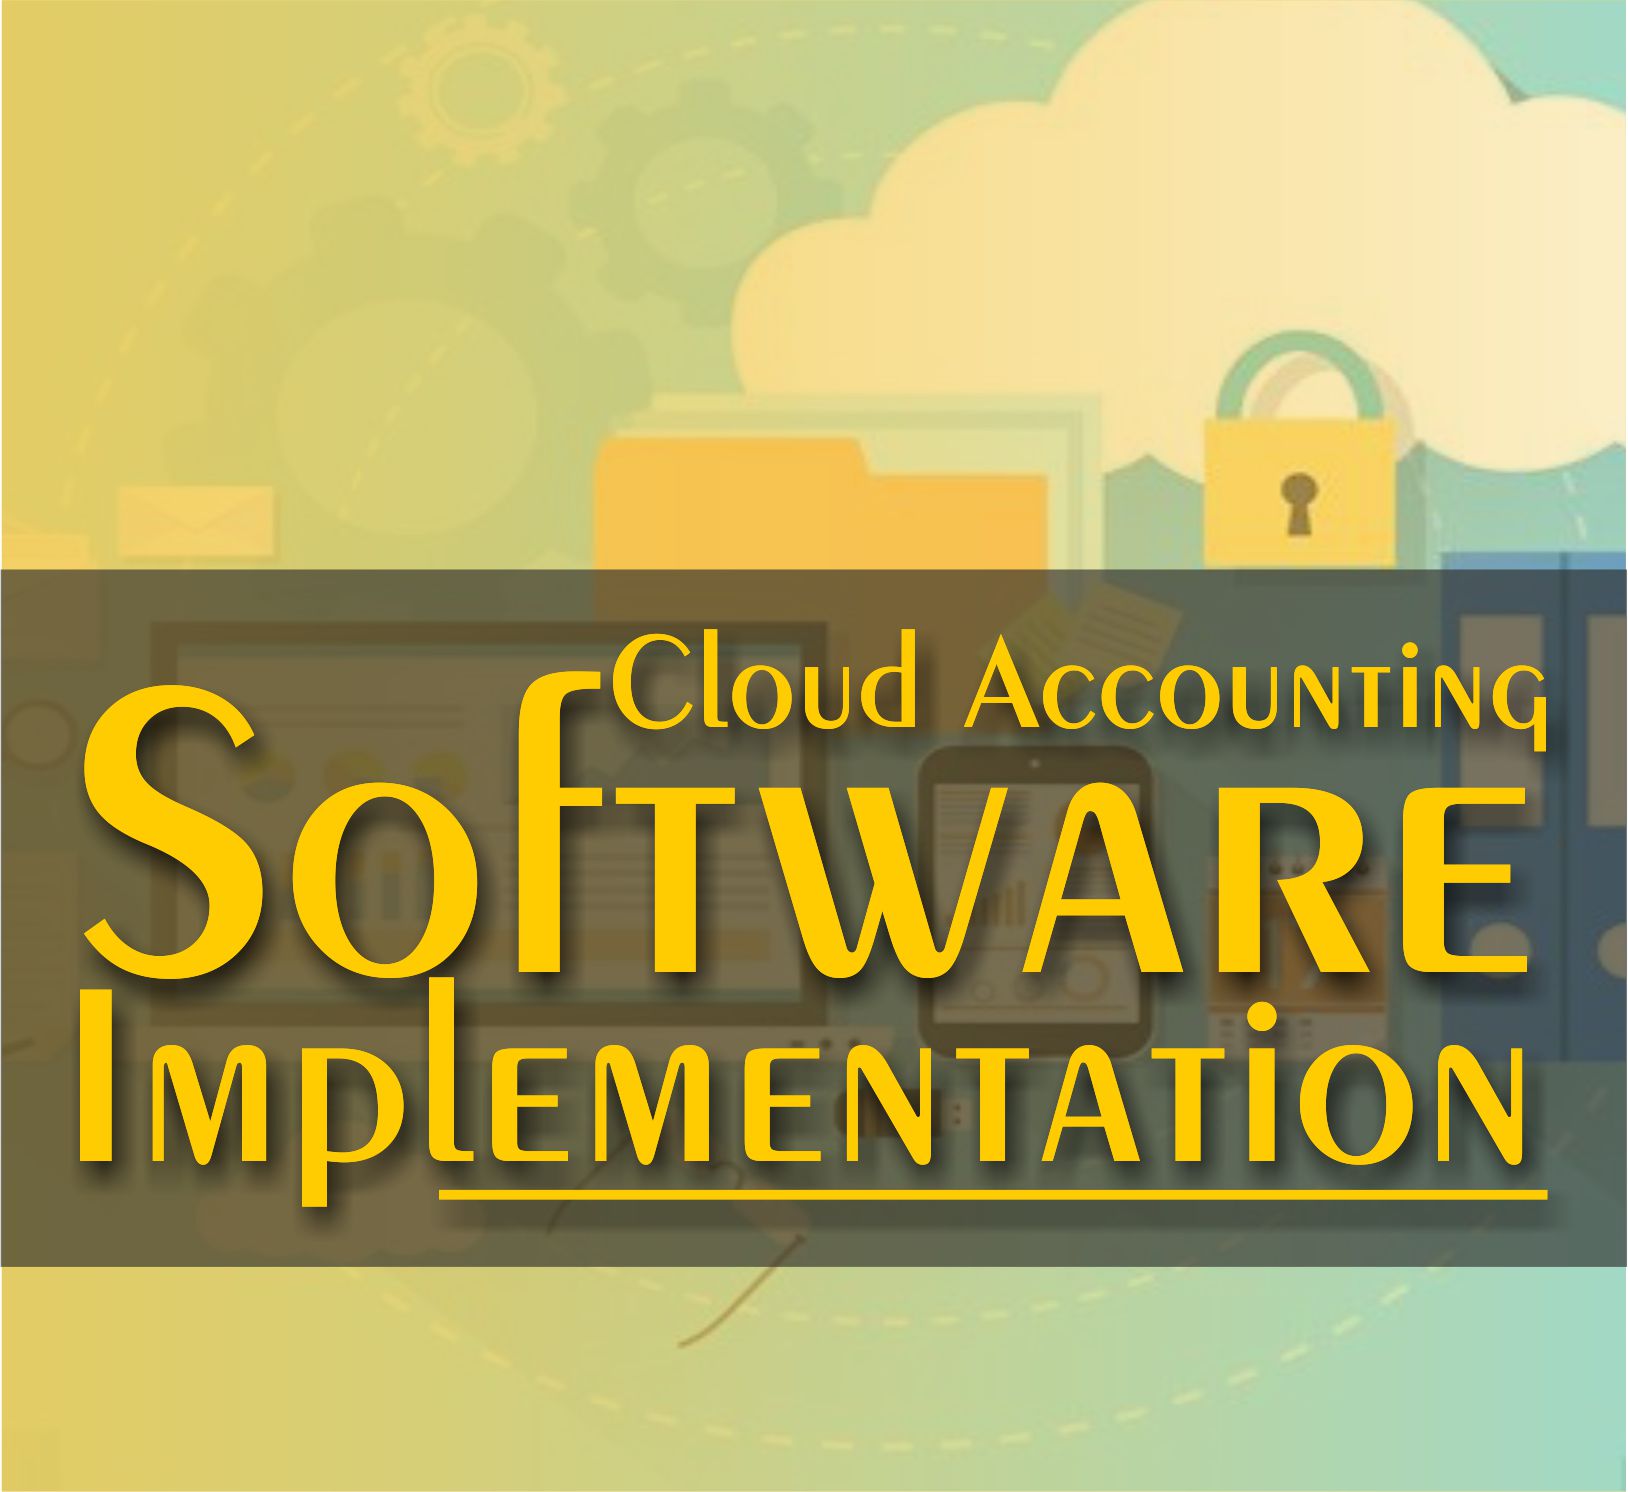 Cloud Accounting Software Implementation TaxDoctor Blog